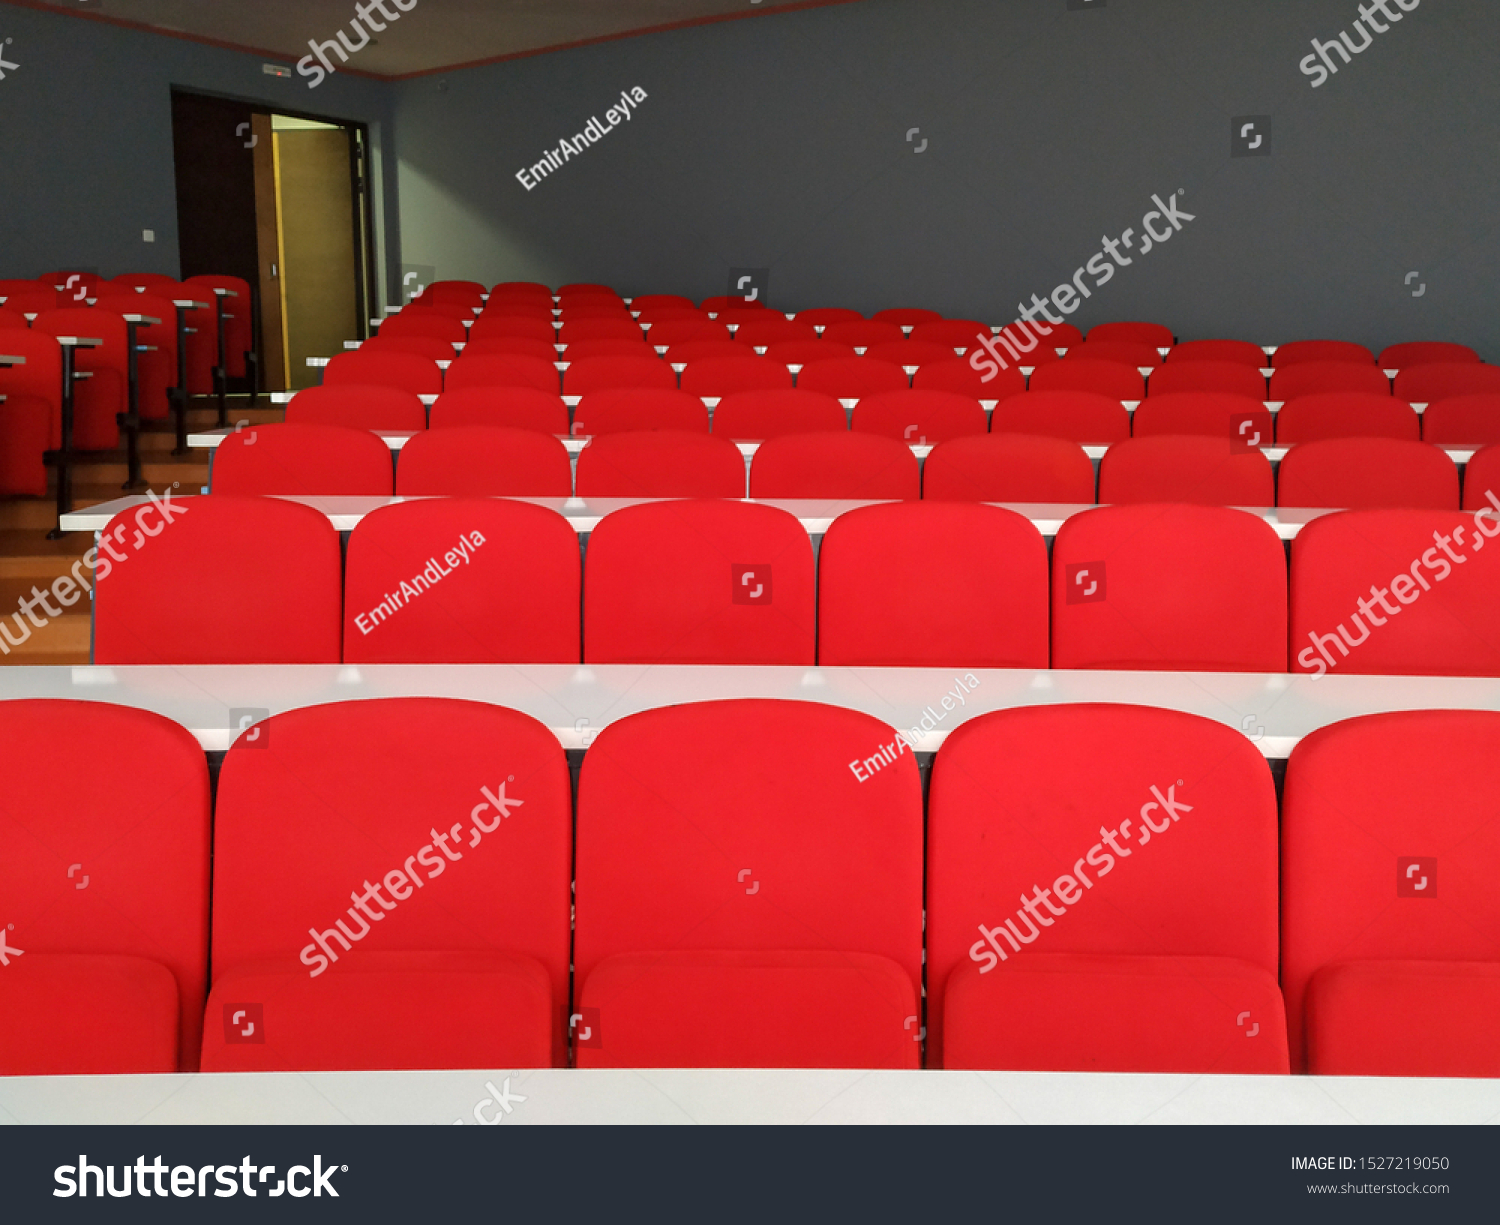 Amphitheater big lecture room with red chairs and white tables for students lined in rows for university or conference lectures with doors in background #1527219050